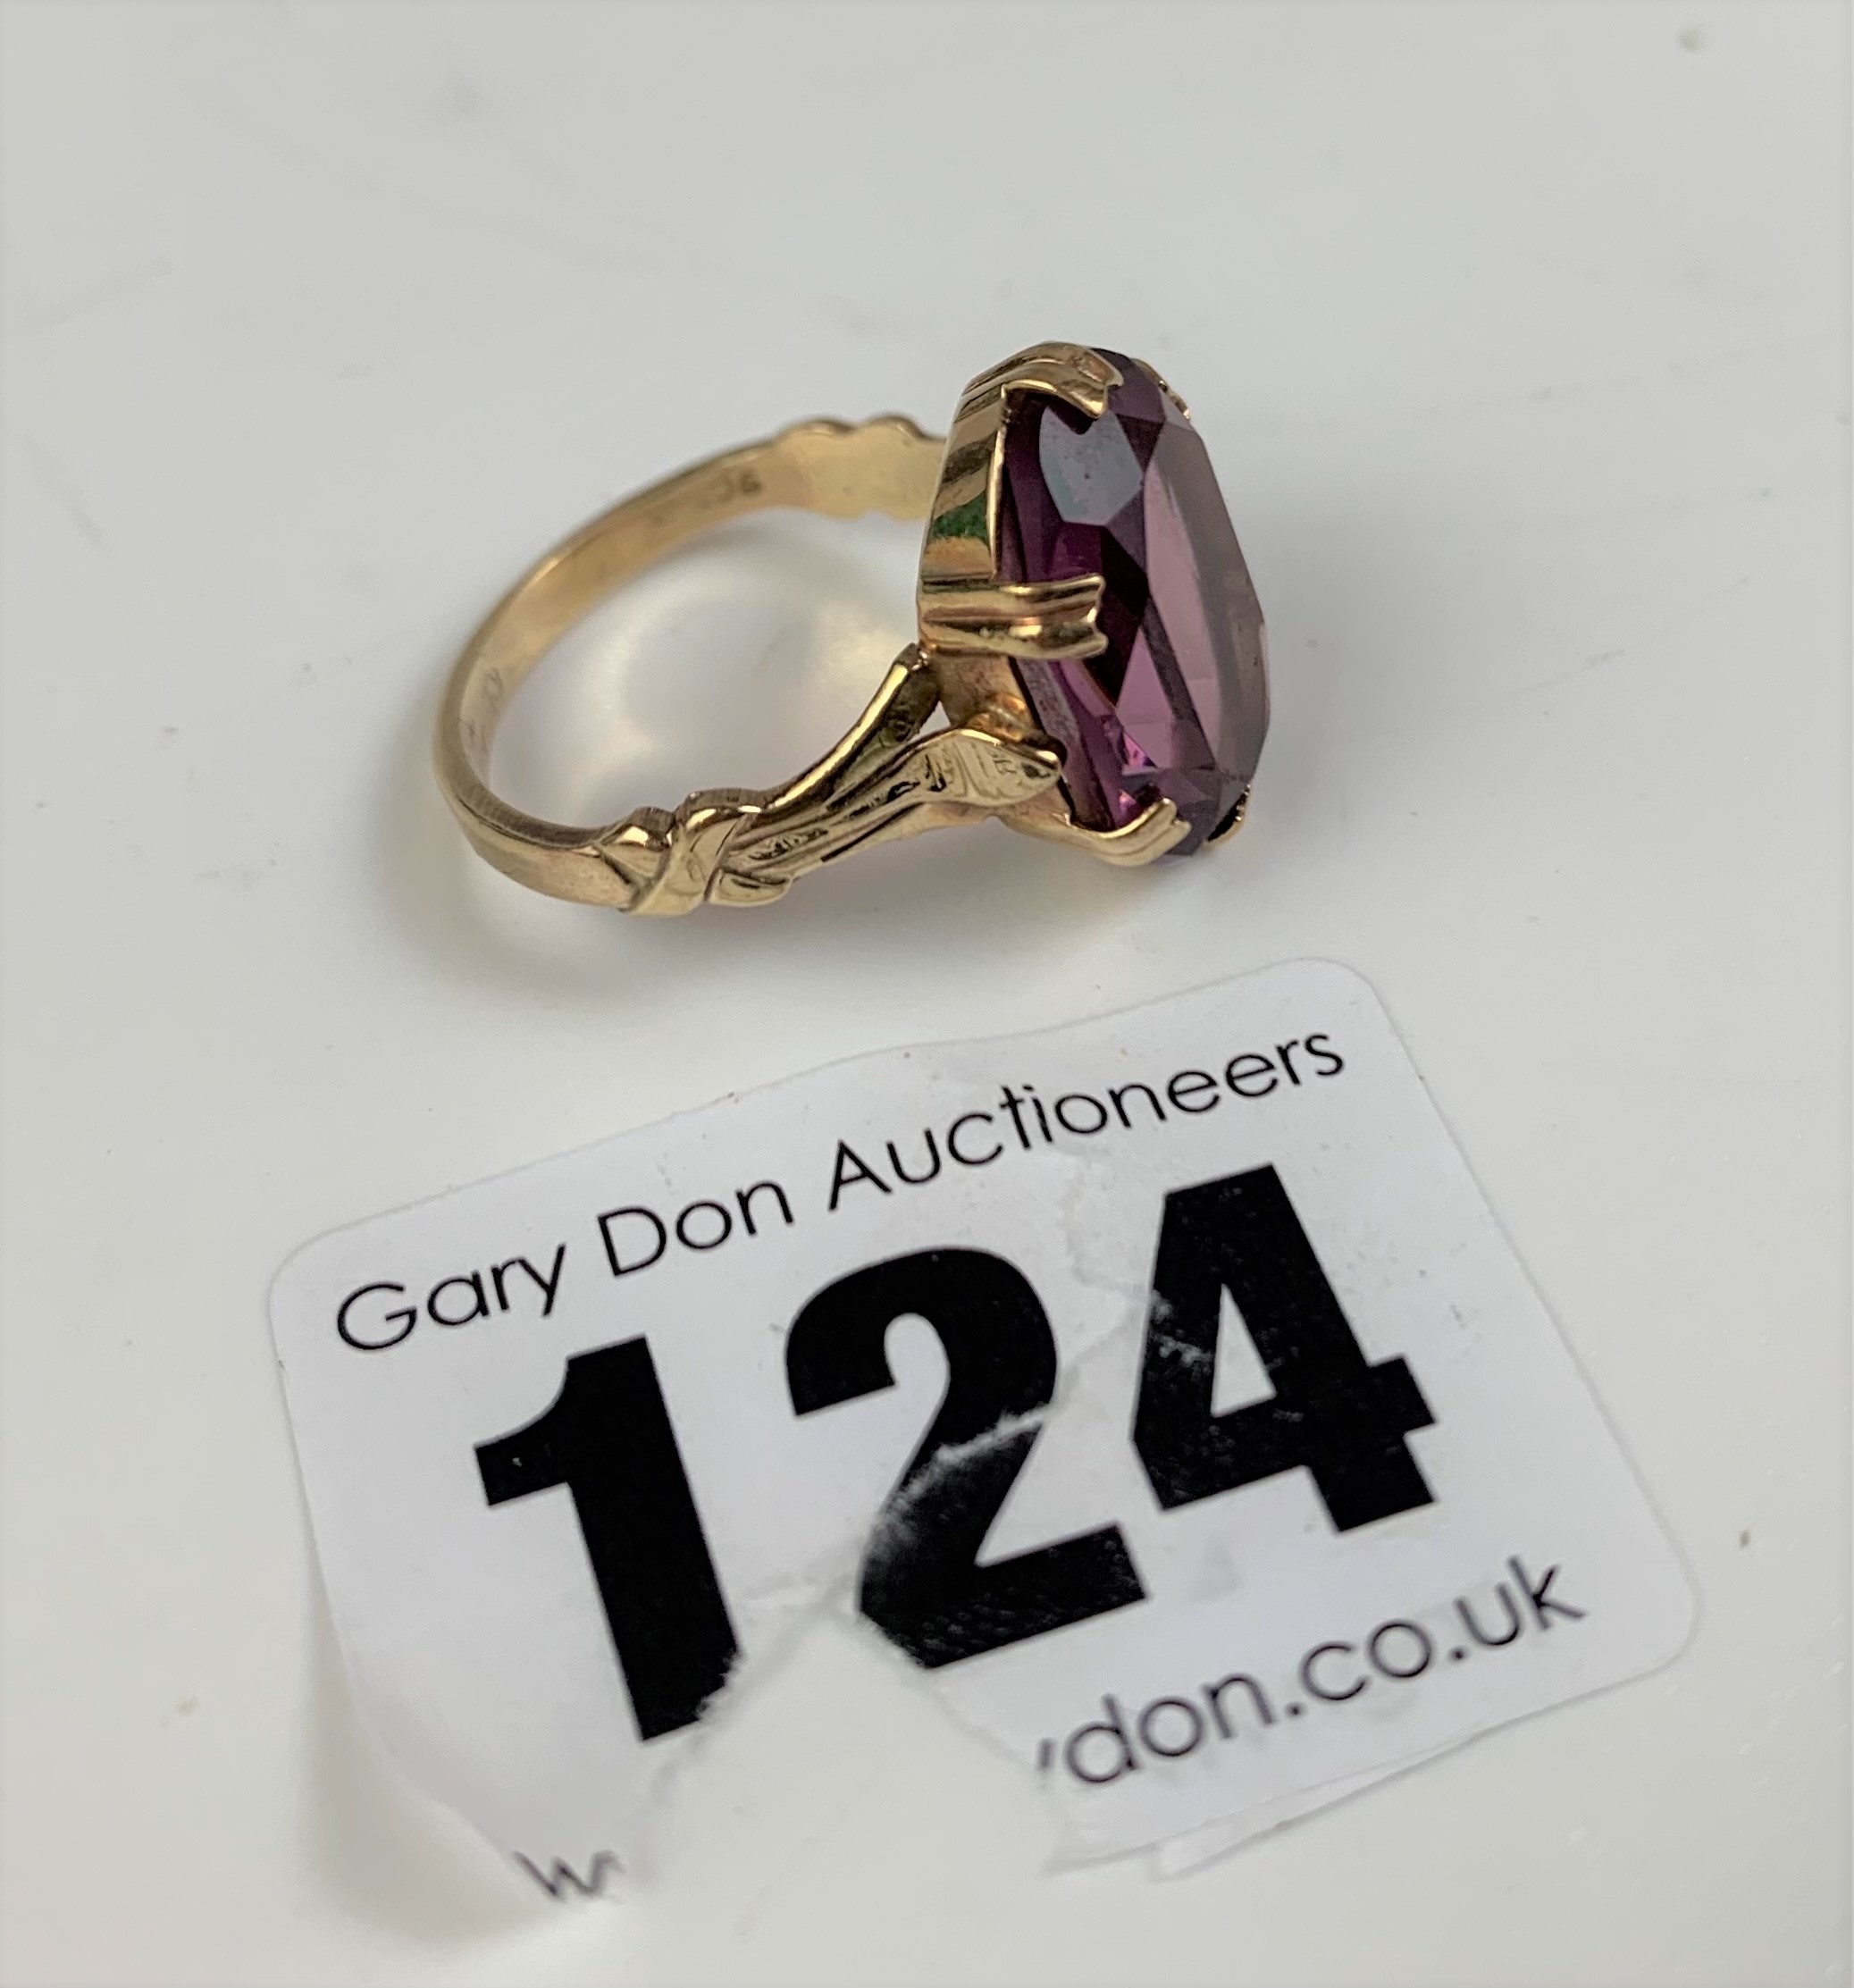 9k gold and pink stone ring, size M, w: 3.9 gms - Image 3 of 6